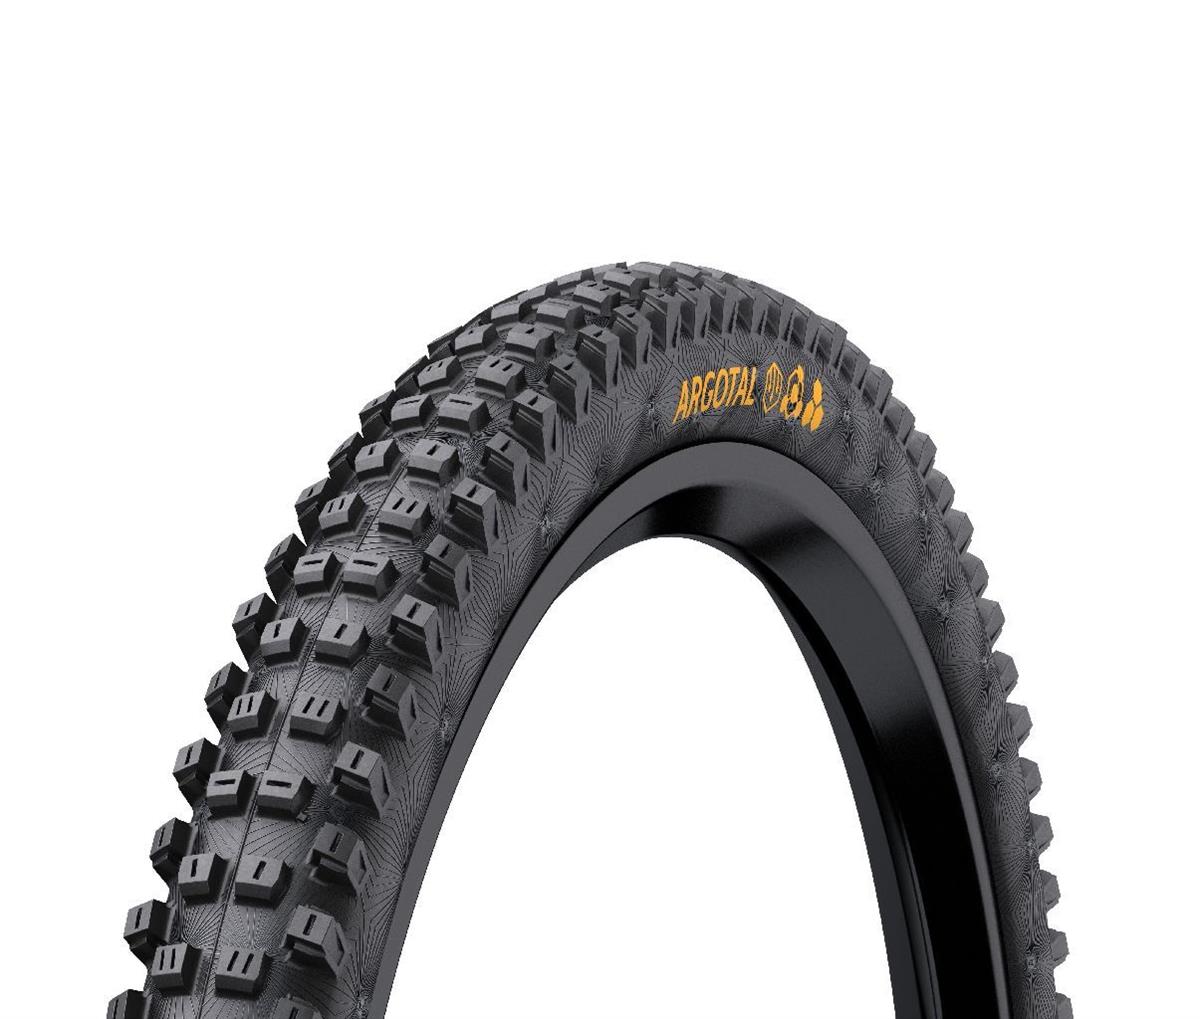 Argotal 29x2.40 Soft-Compound/Downhill Casing Folding Tubeless Ready Tire